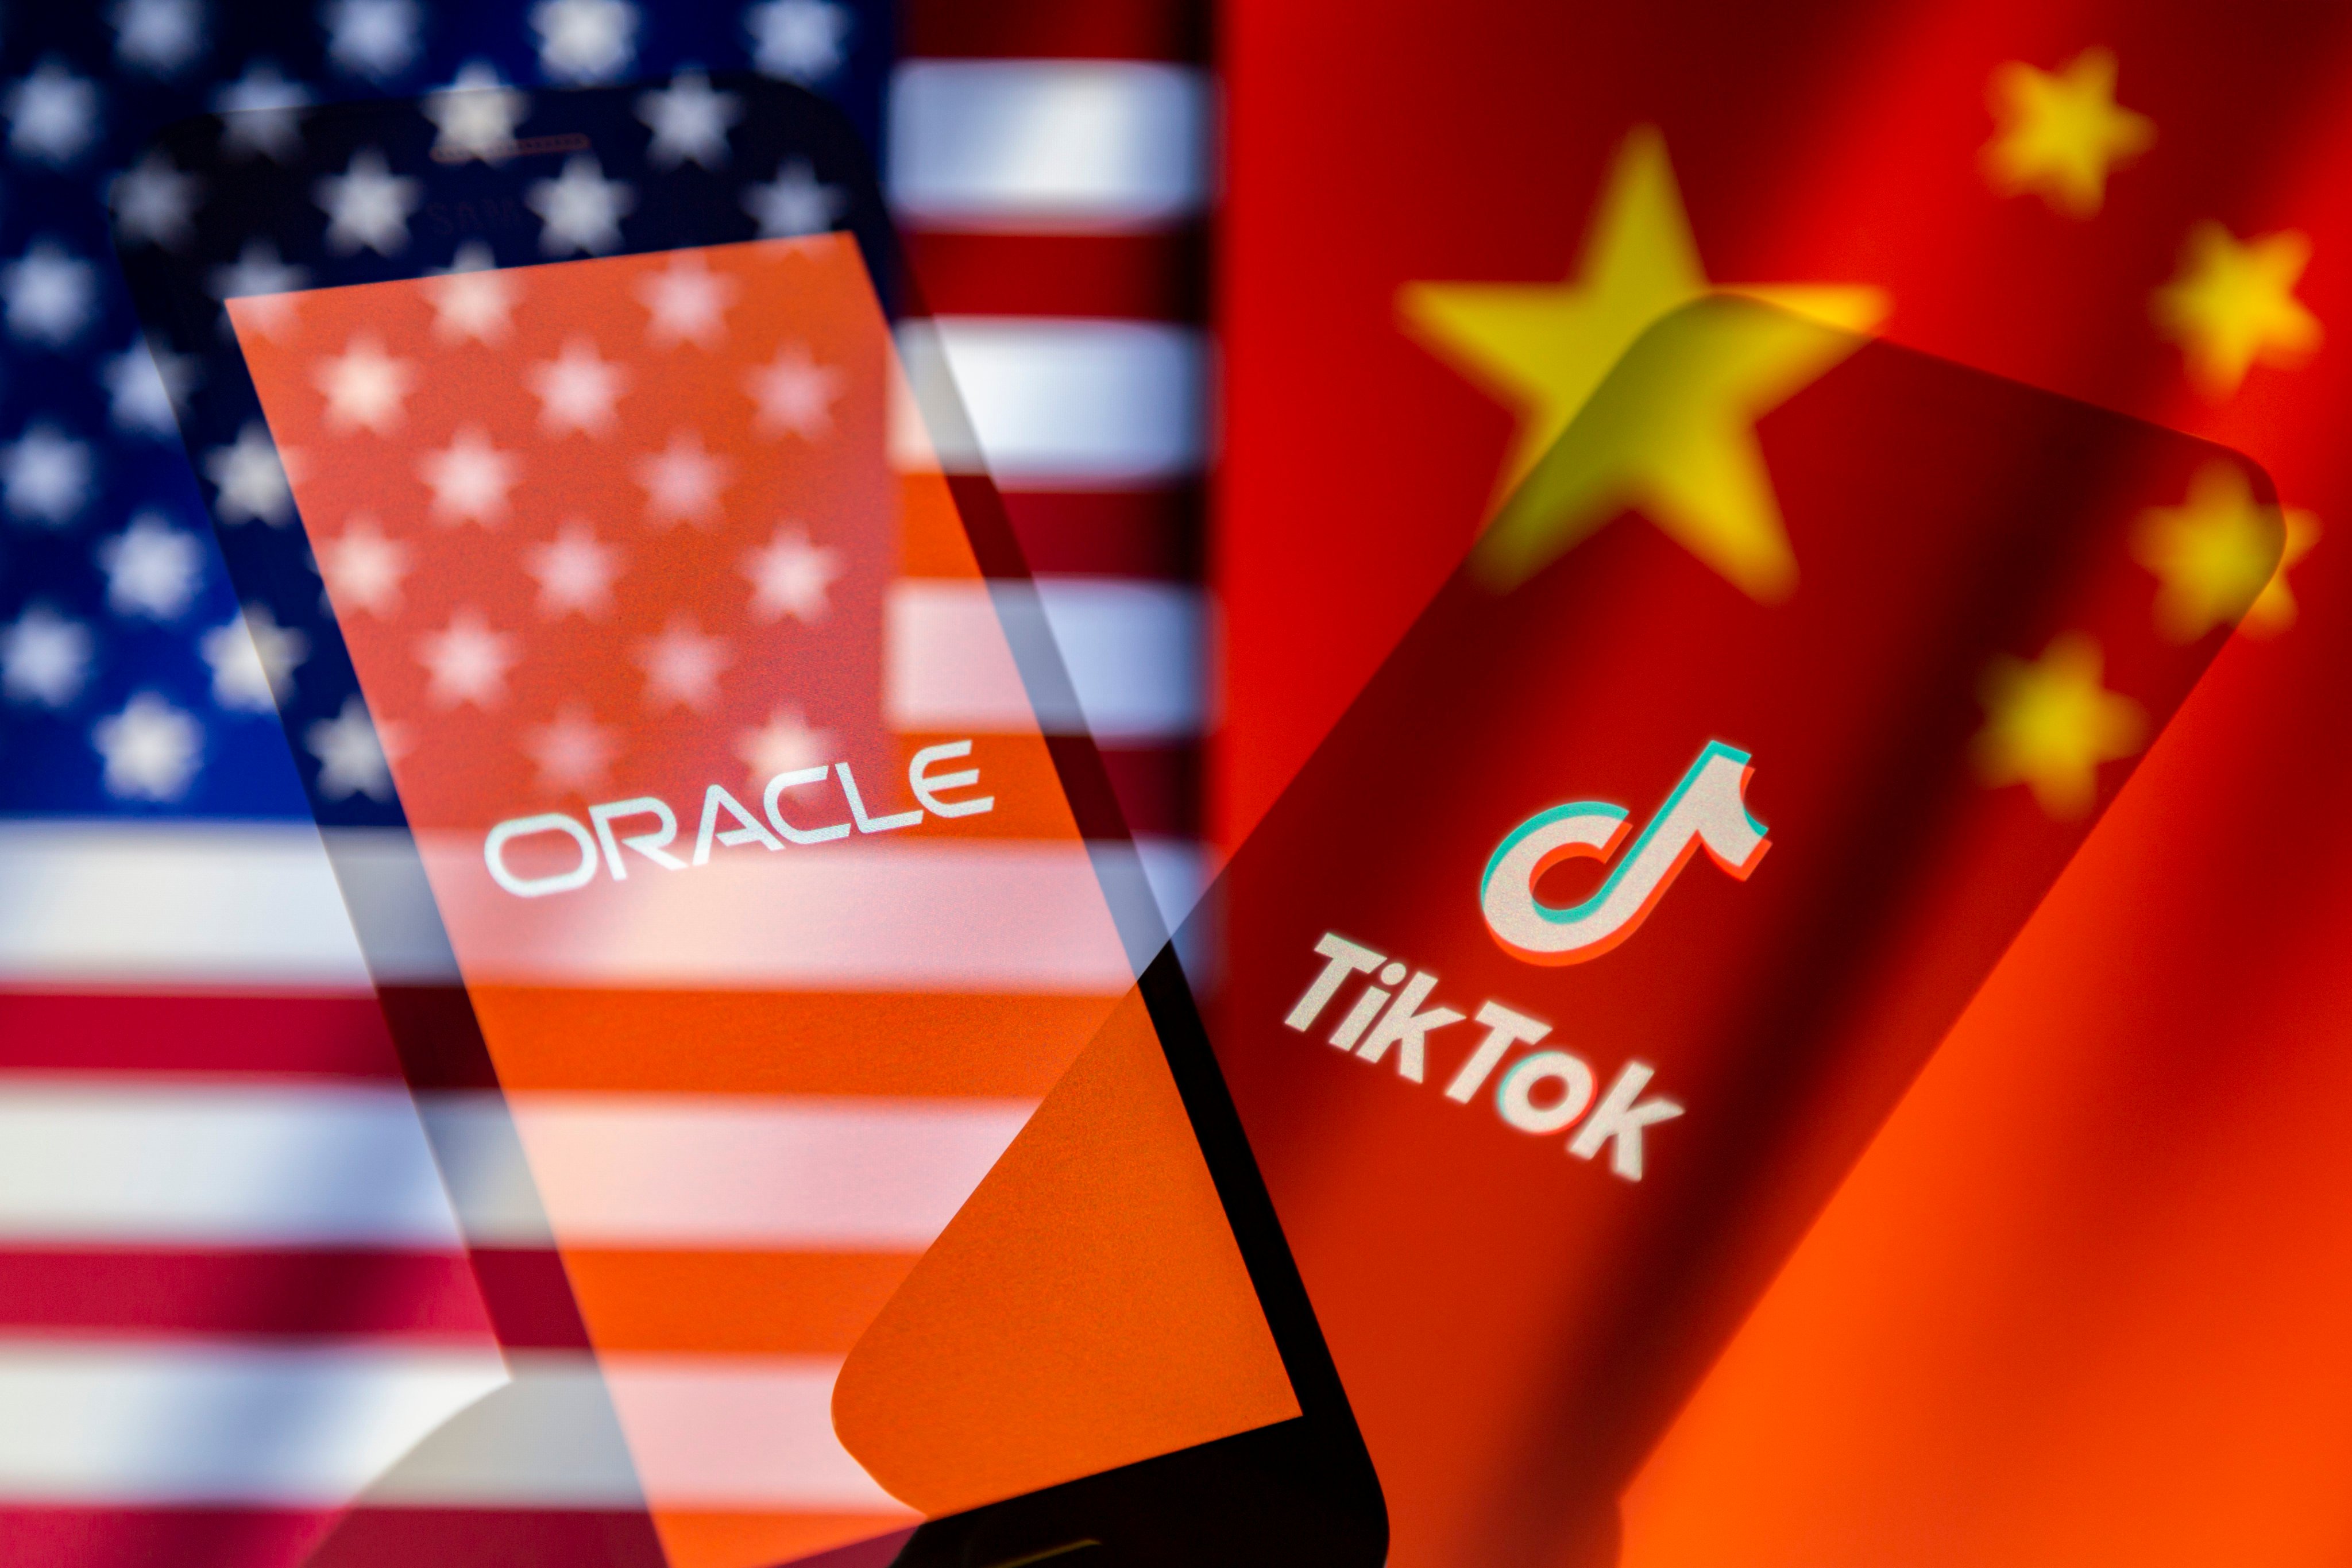 TikTok has been working with Oracle on an initiative called “Project Texas”, which is meant to cordon off US data from its Chinese parent, ByteDance. Photo: dpa